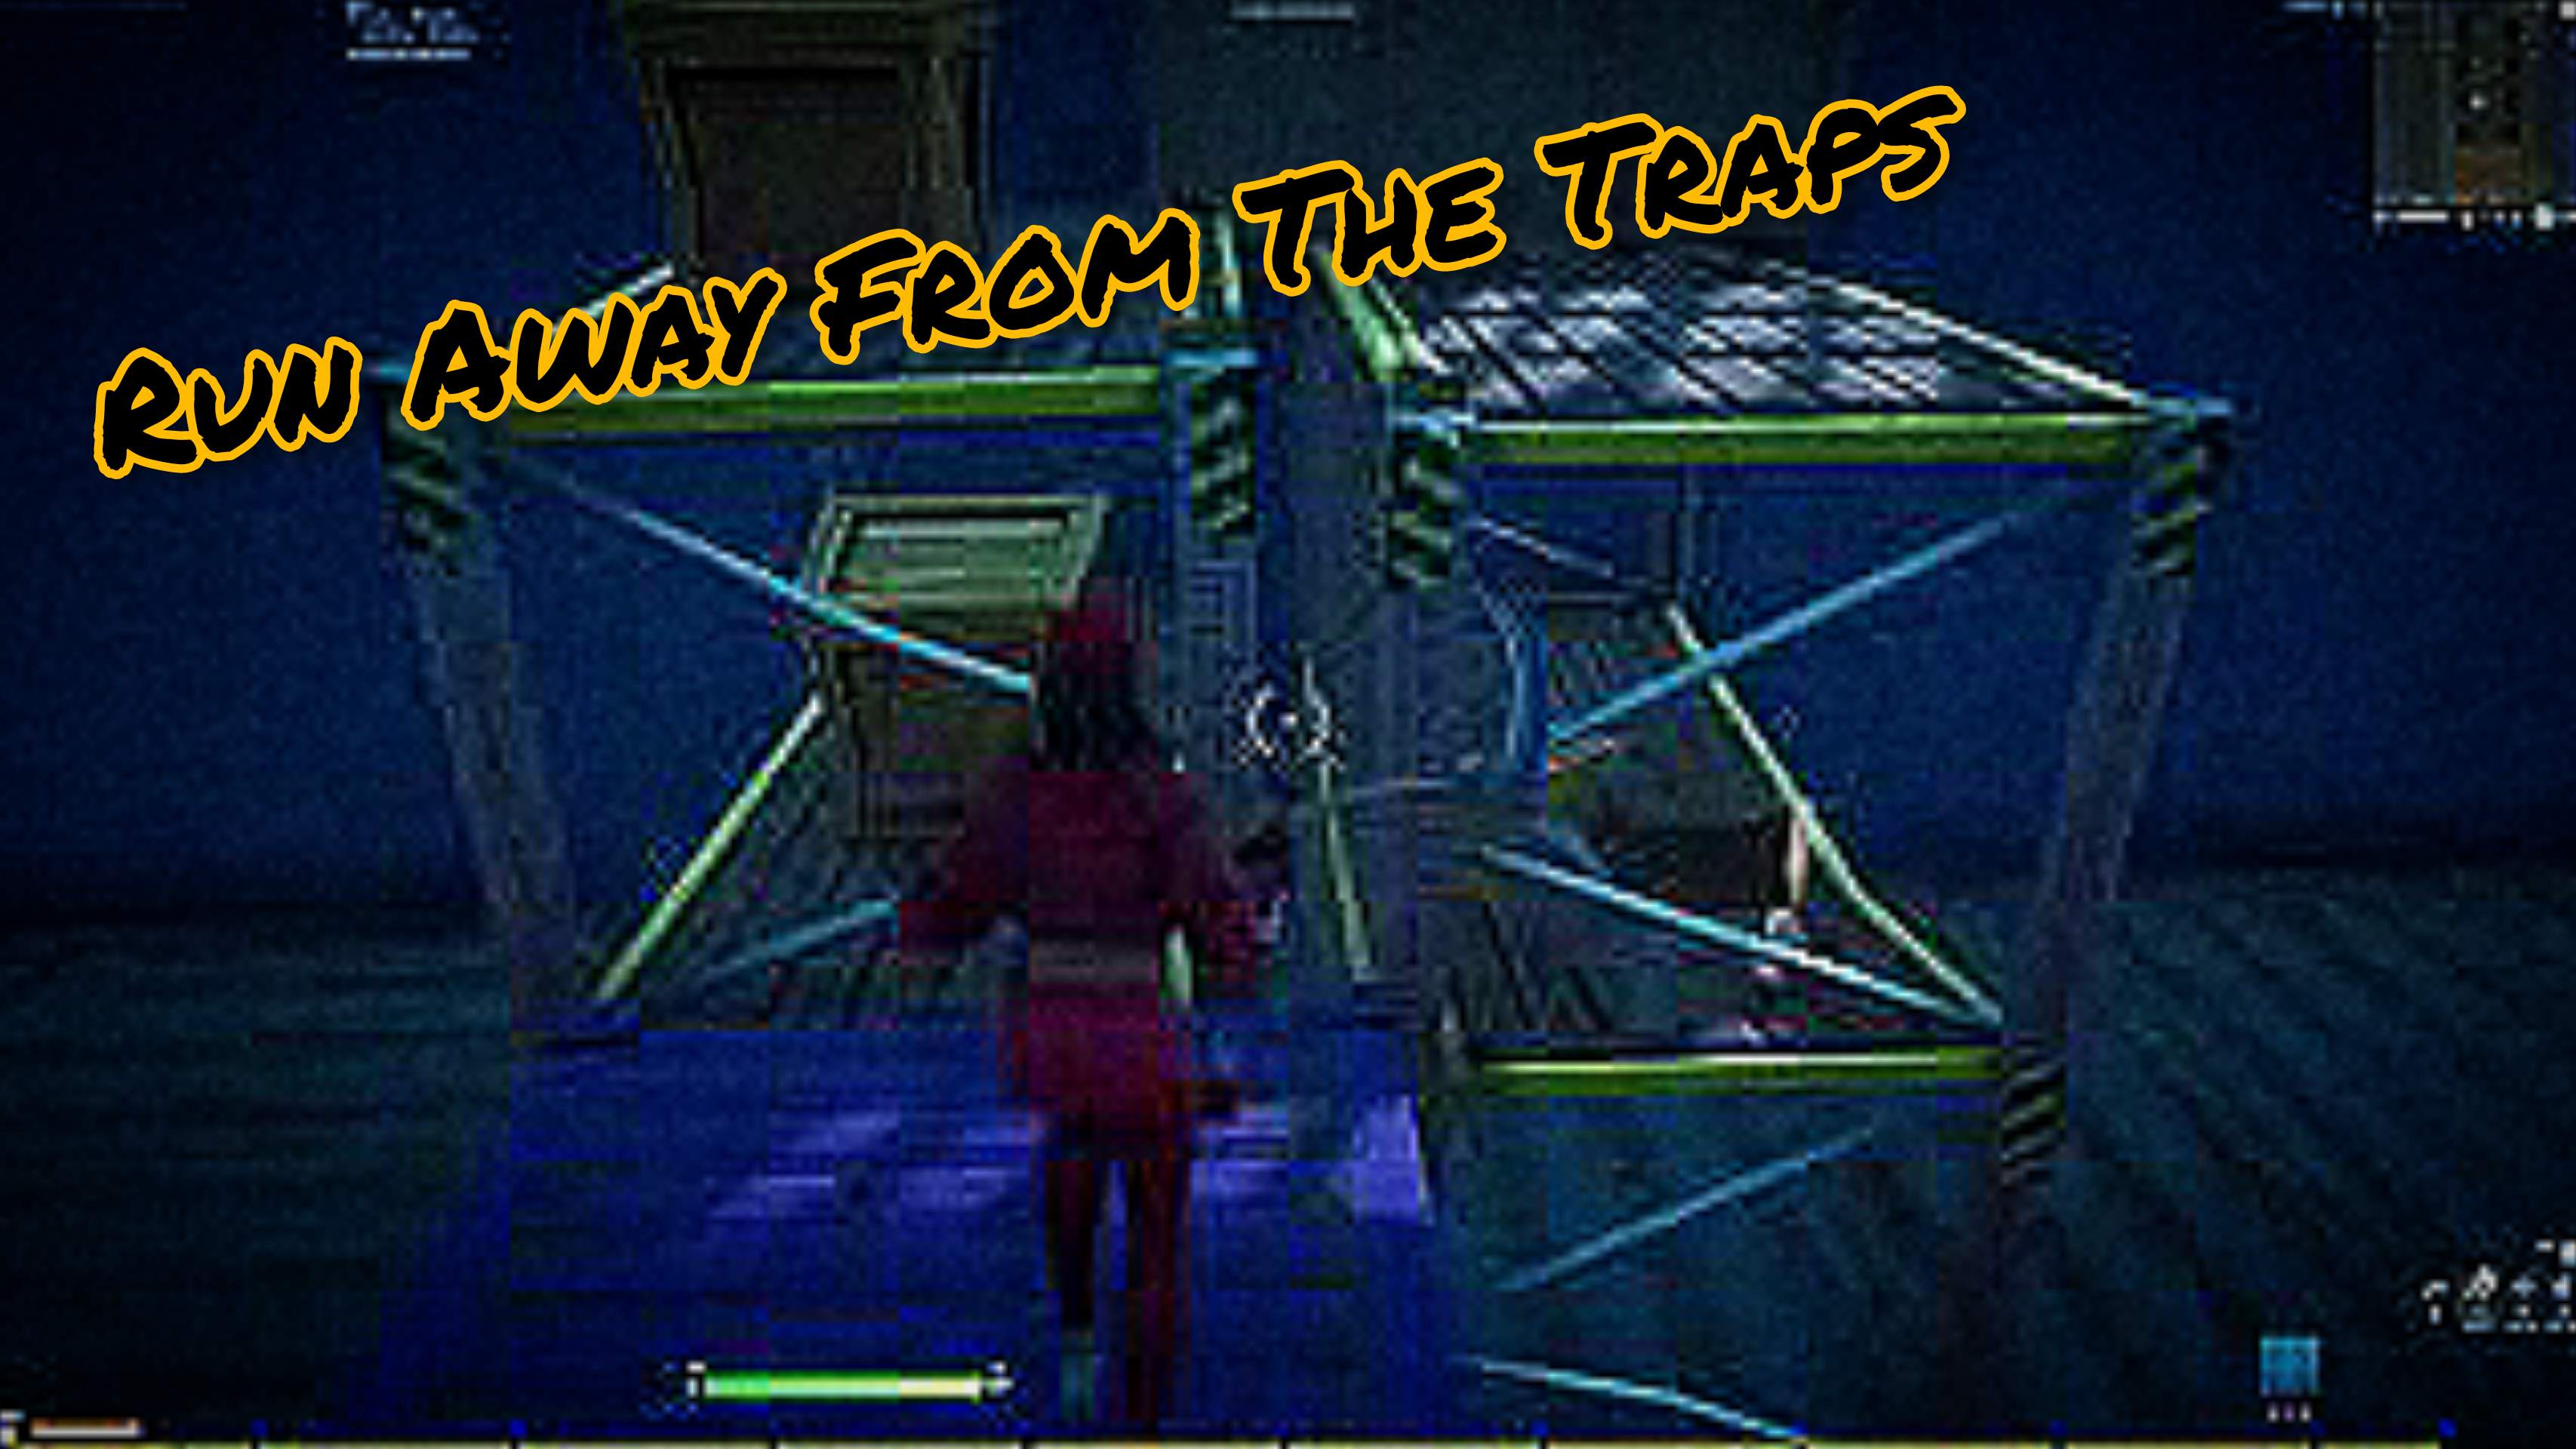 RUN AWAY FROM THE TRAPS